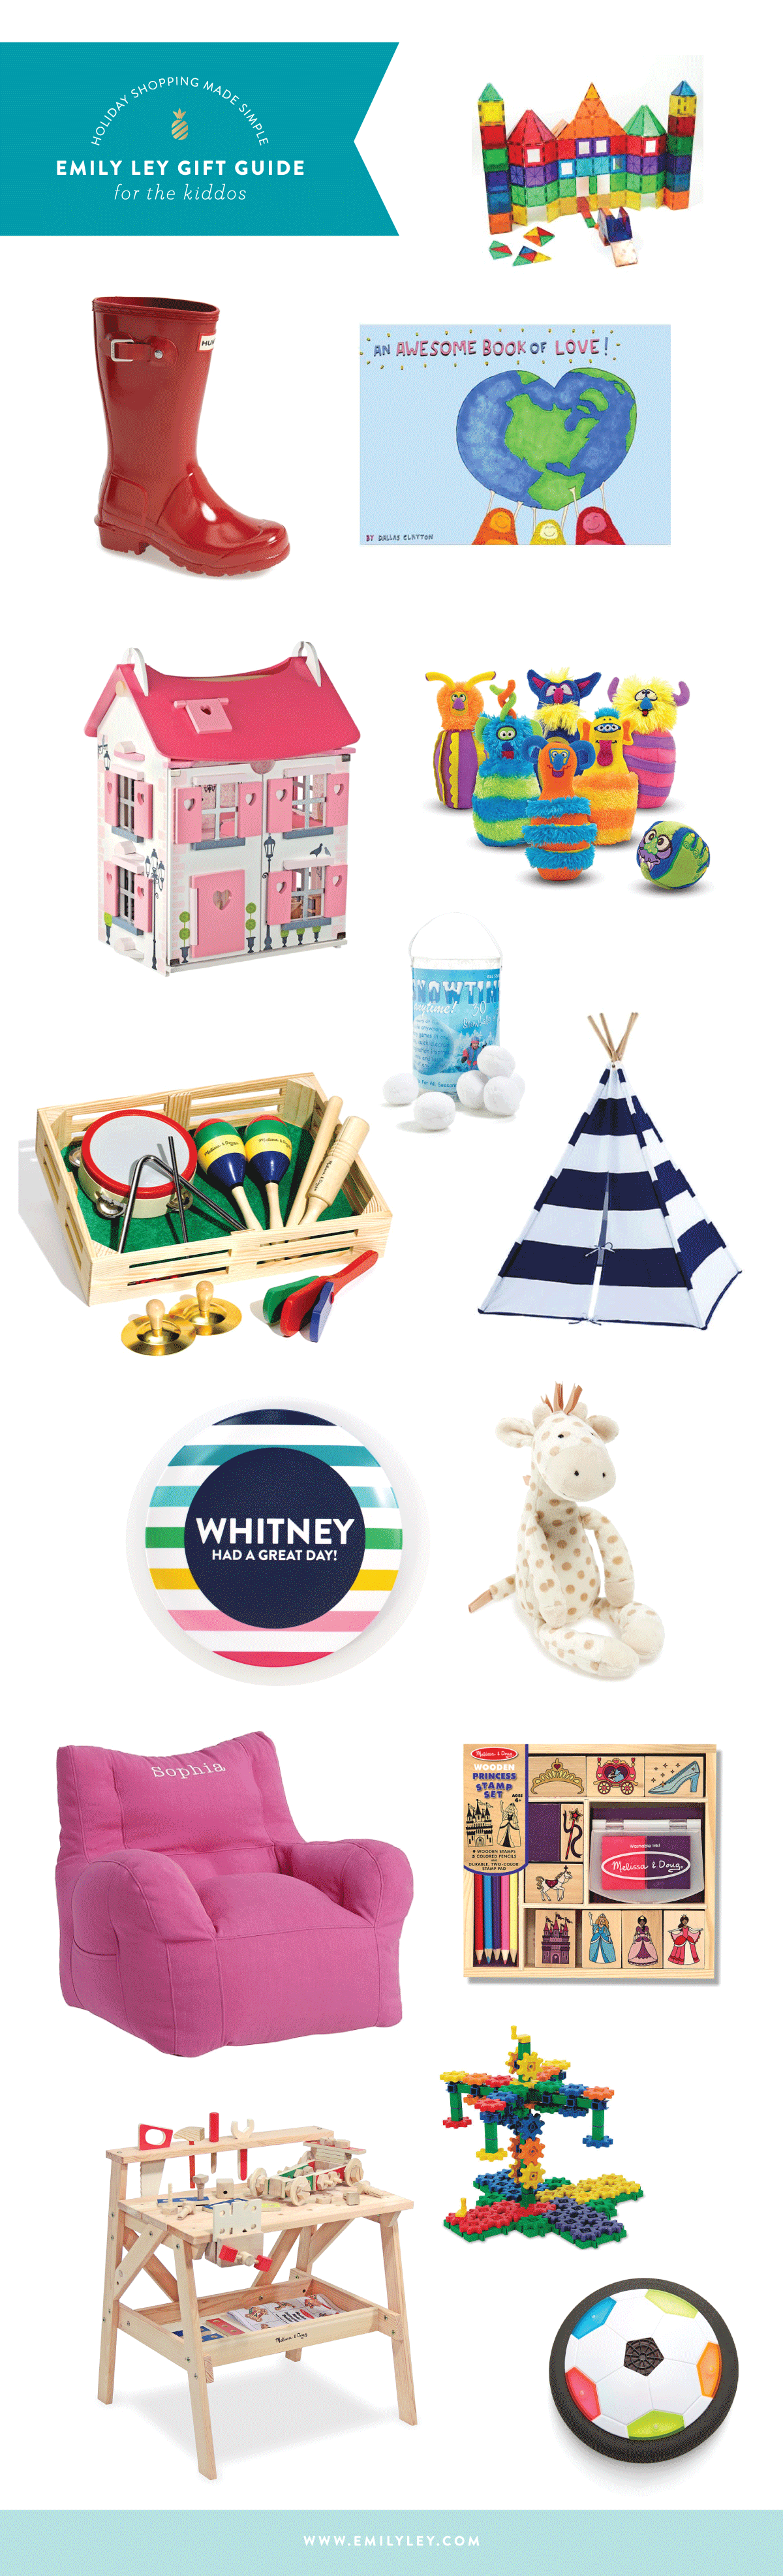 Emily-Ley-Gift-Guide-Kiddos.png